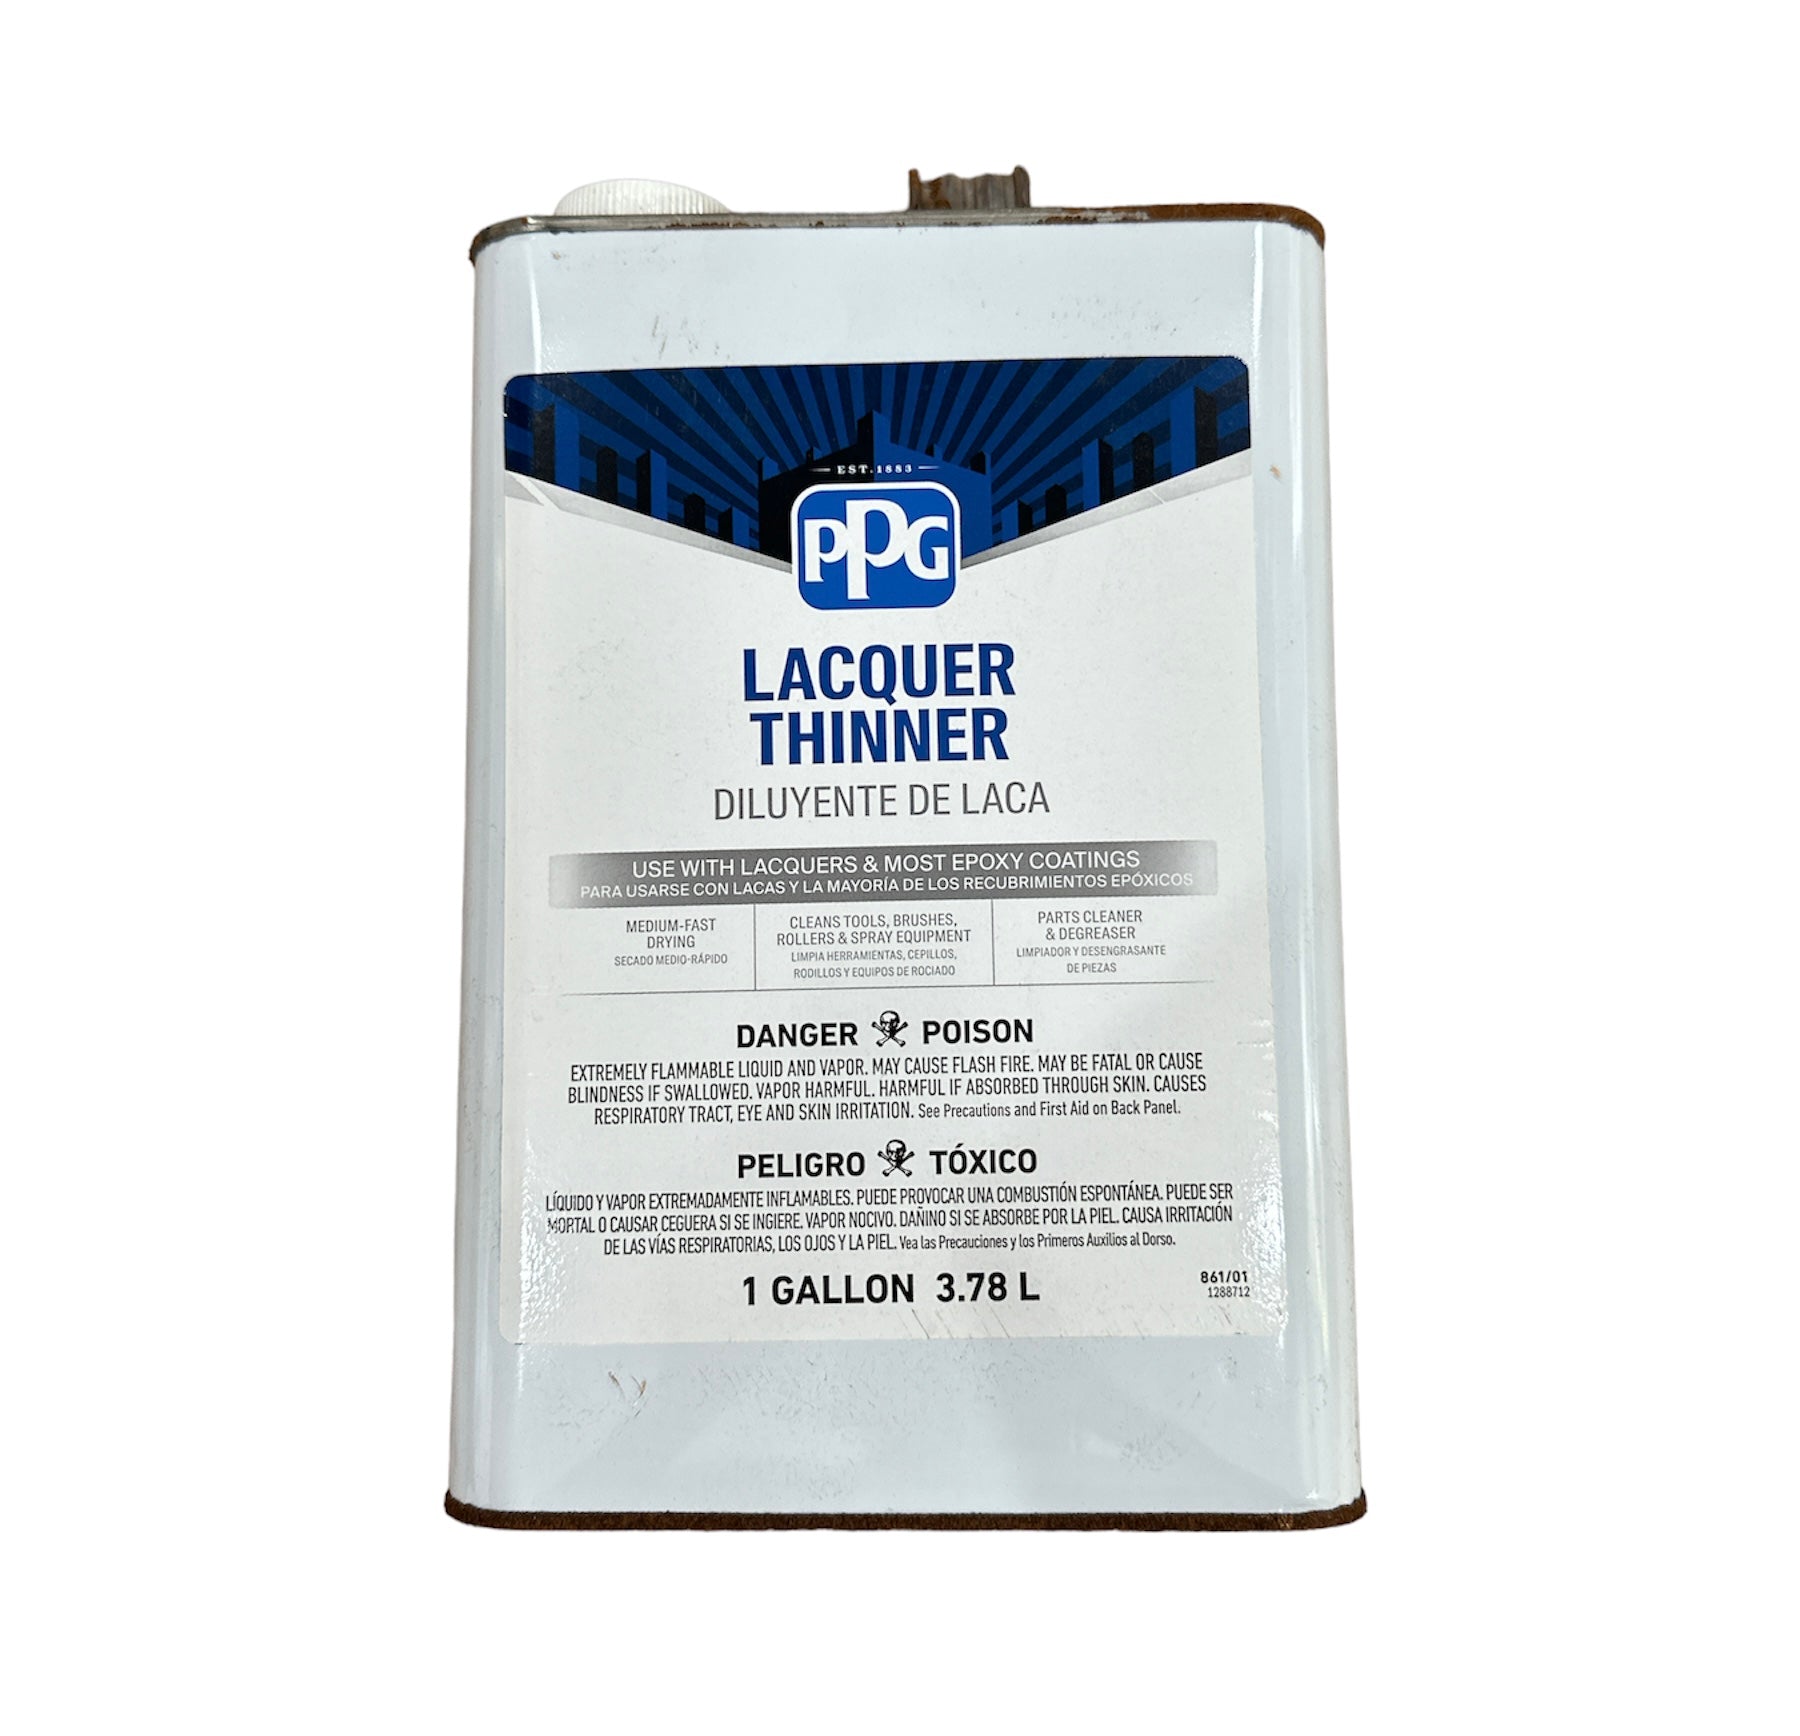 PPG Lacquer Thinner (1 Gallon)